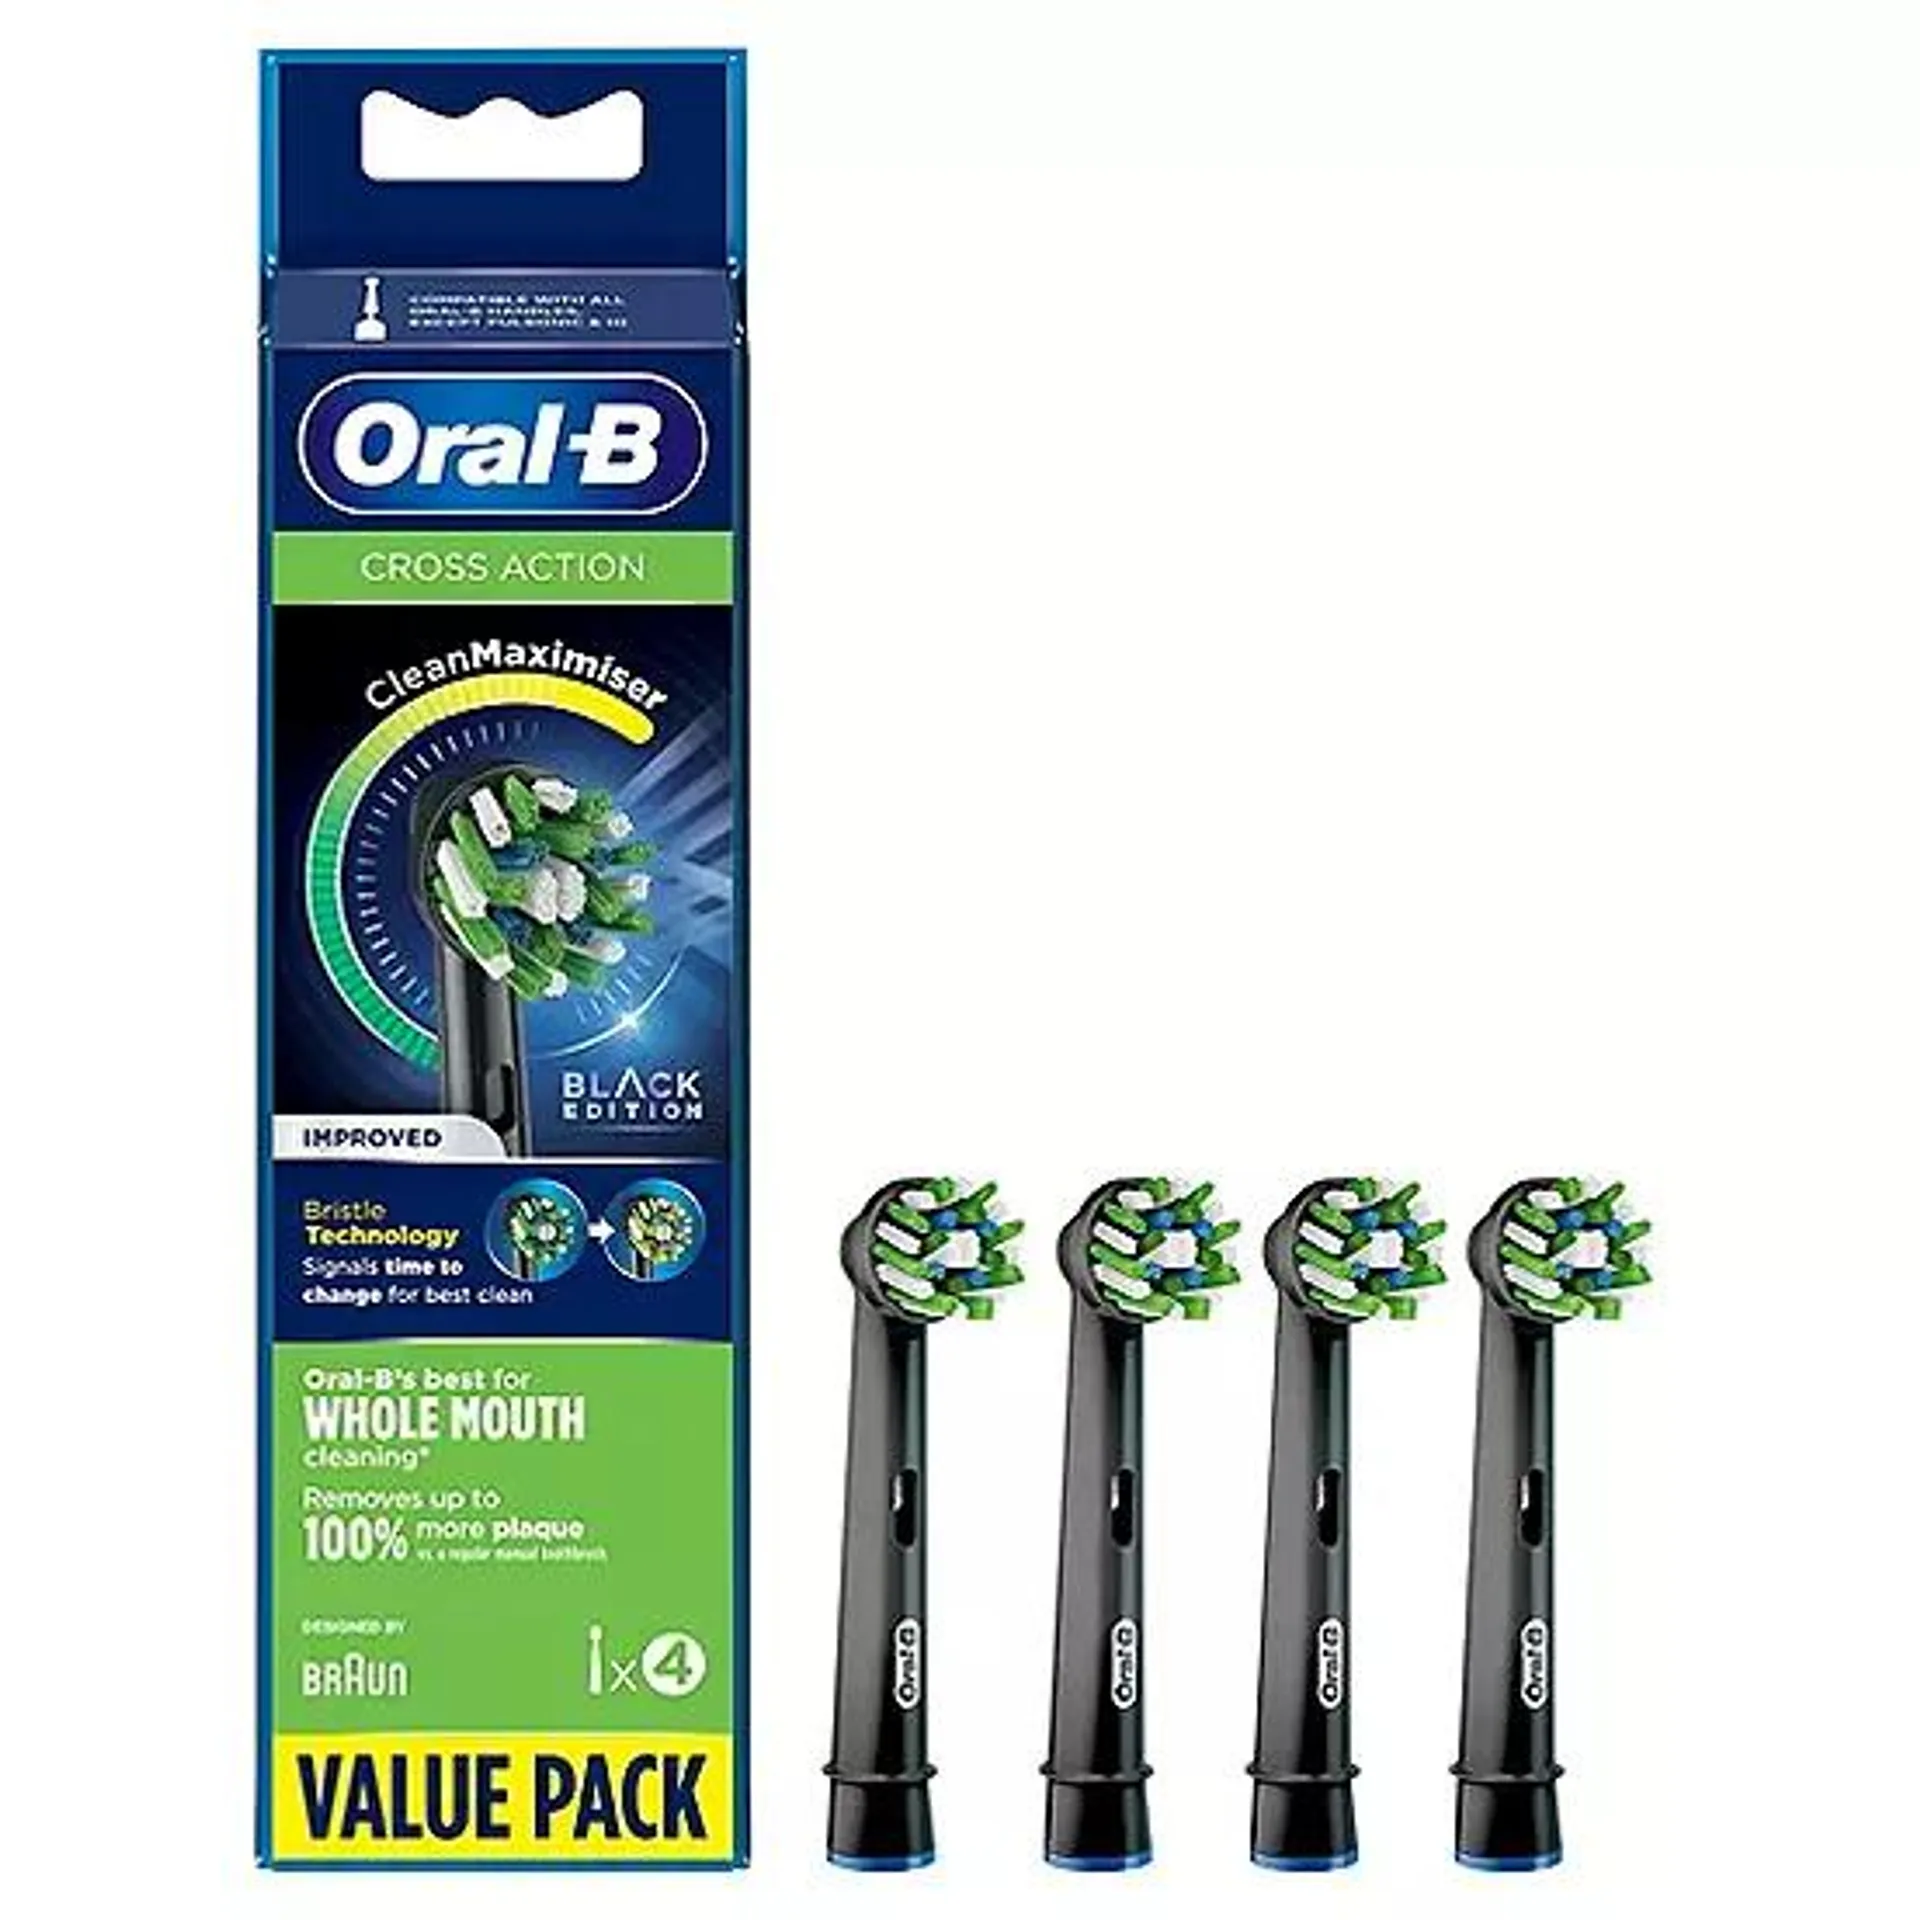 Oral-B CrossAction Black Power Toothbrush Refill Heads - Pack of 4